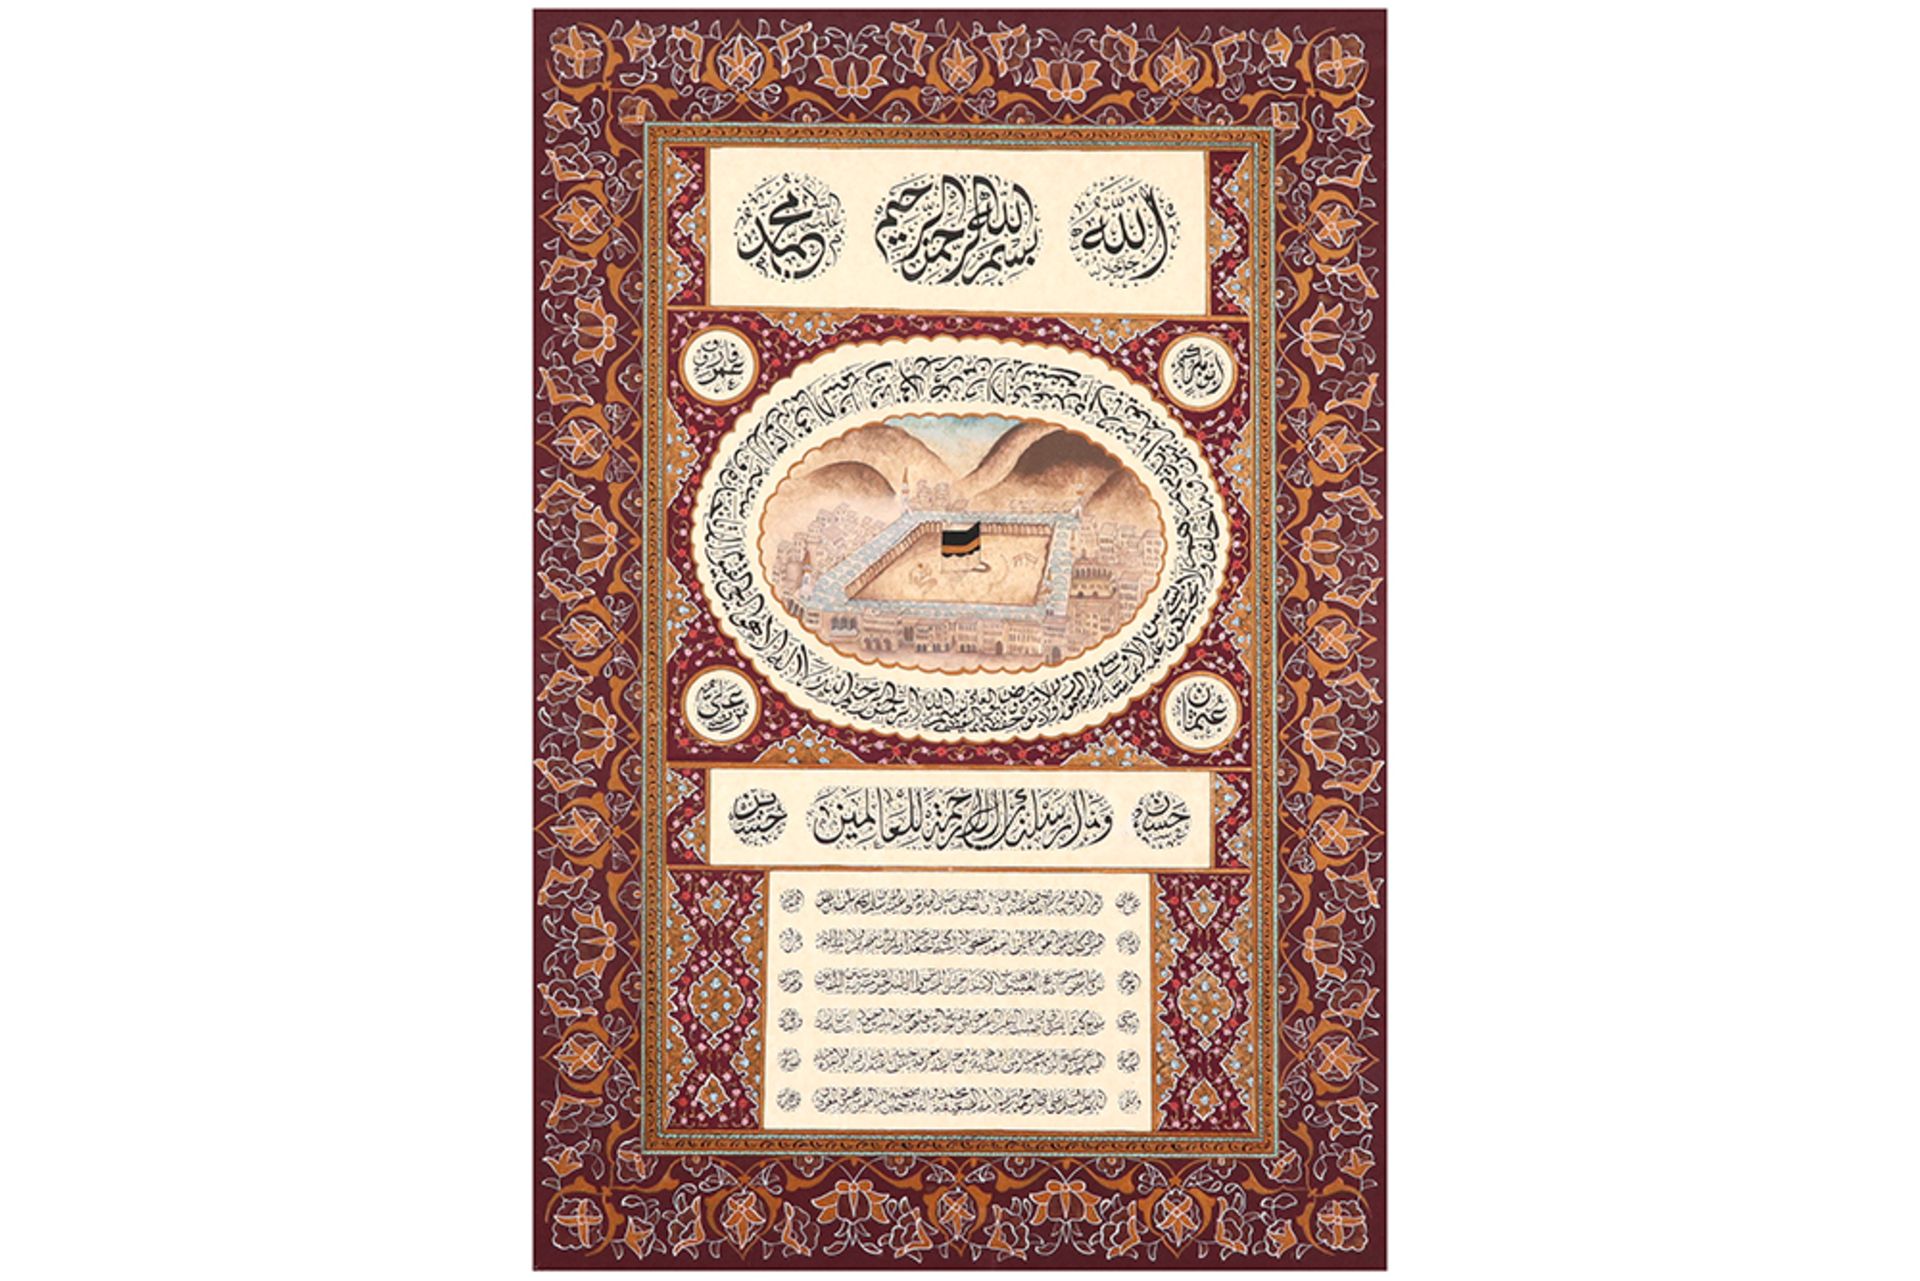 A Ottoman Hilya by Mahmoud student of Ali Al-Baan : a single leaf, text panel at the top with the